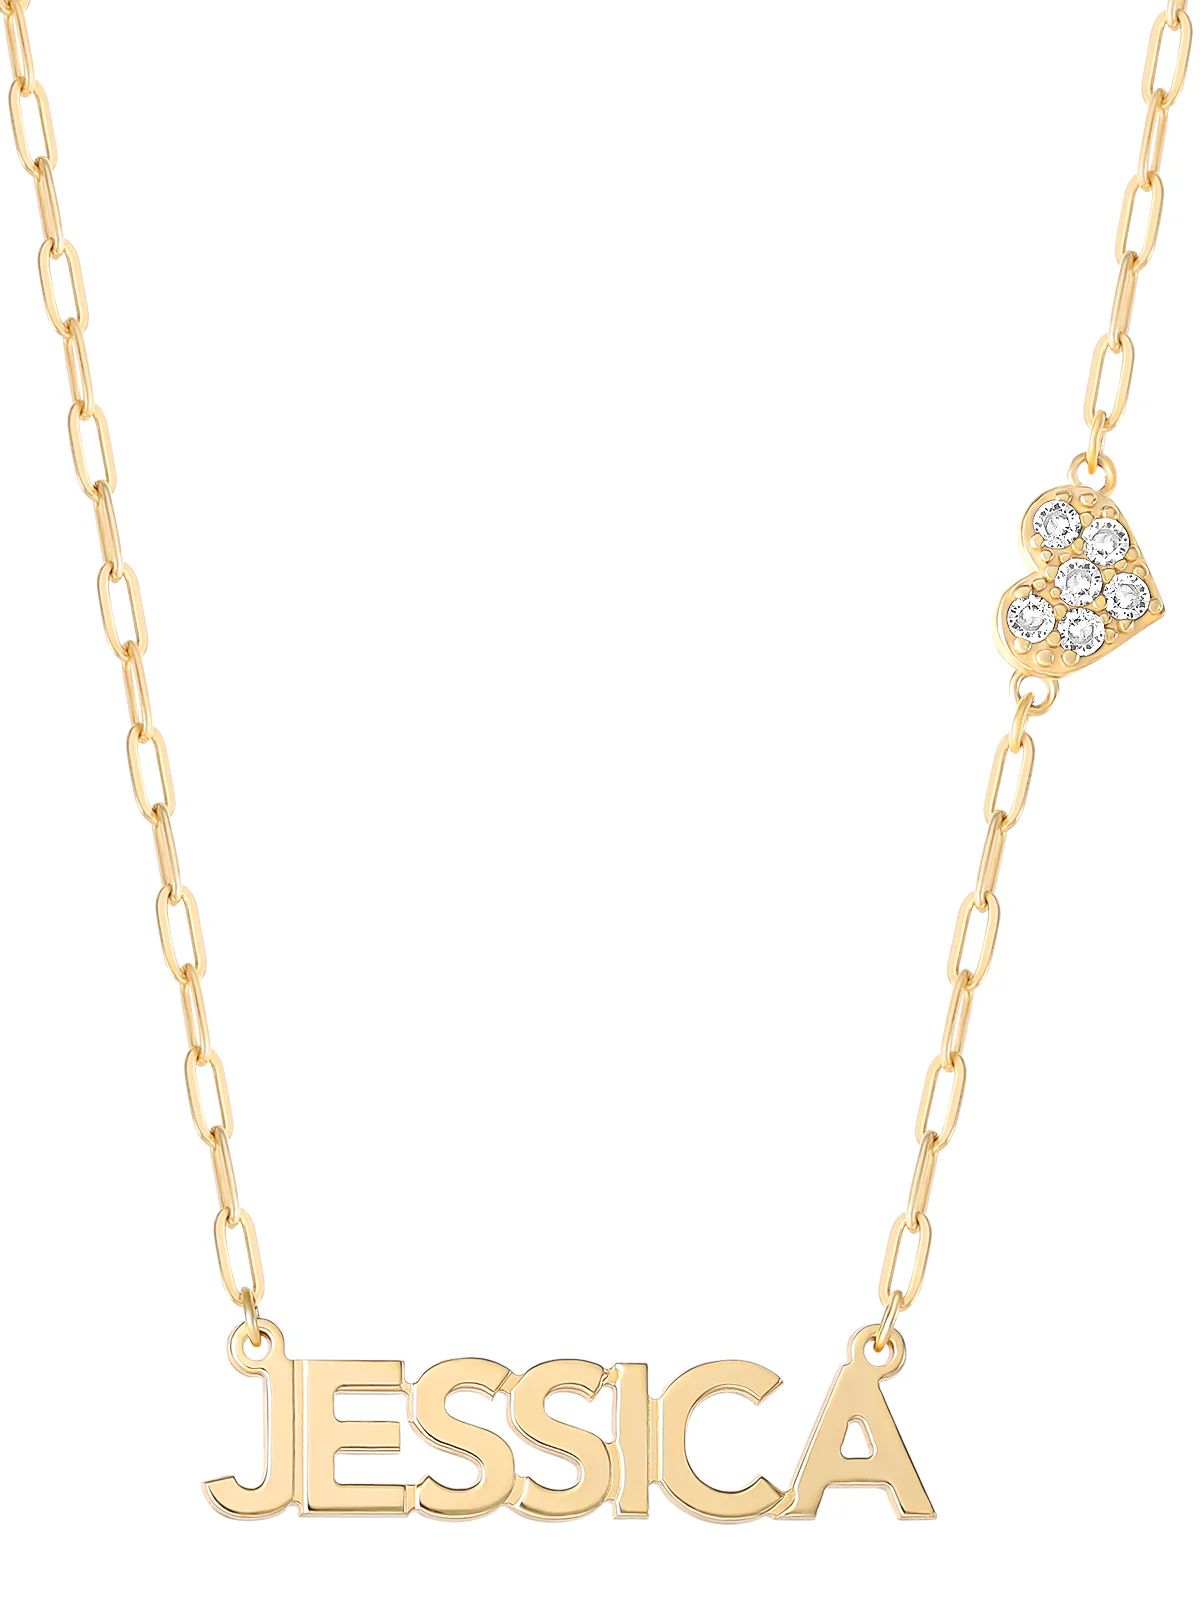 Personalized Necklace with Pavé Cubic Zirconia Charm - Gold | Jessica Simpson E Commerce